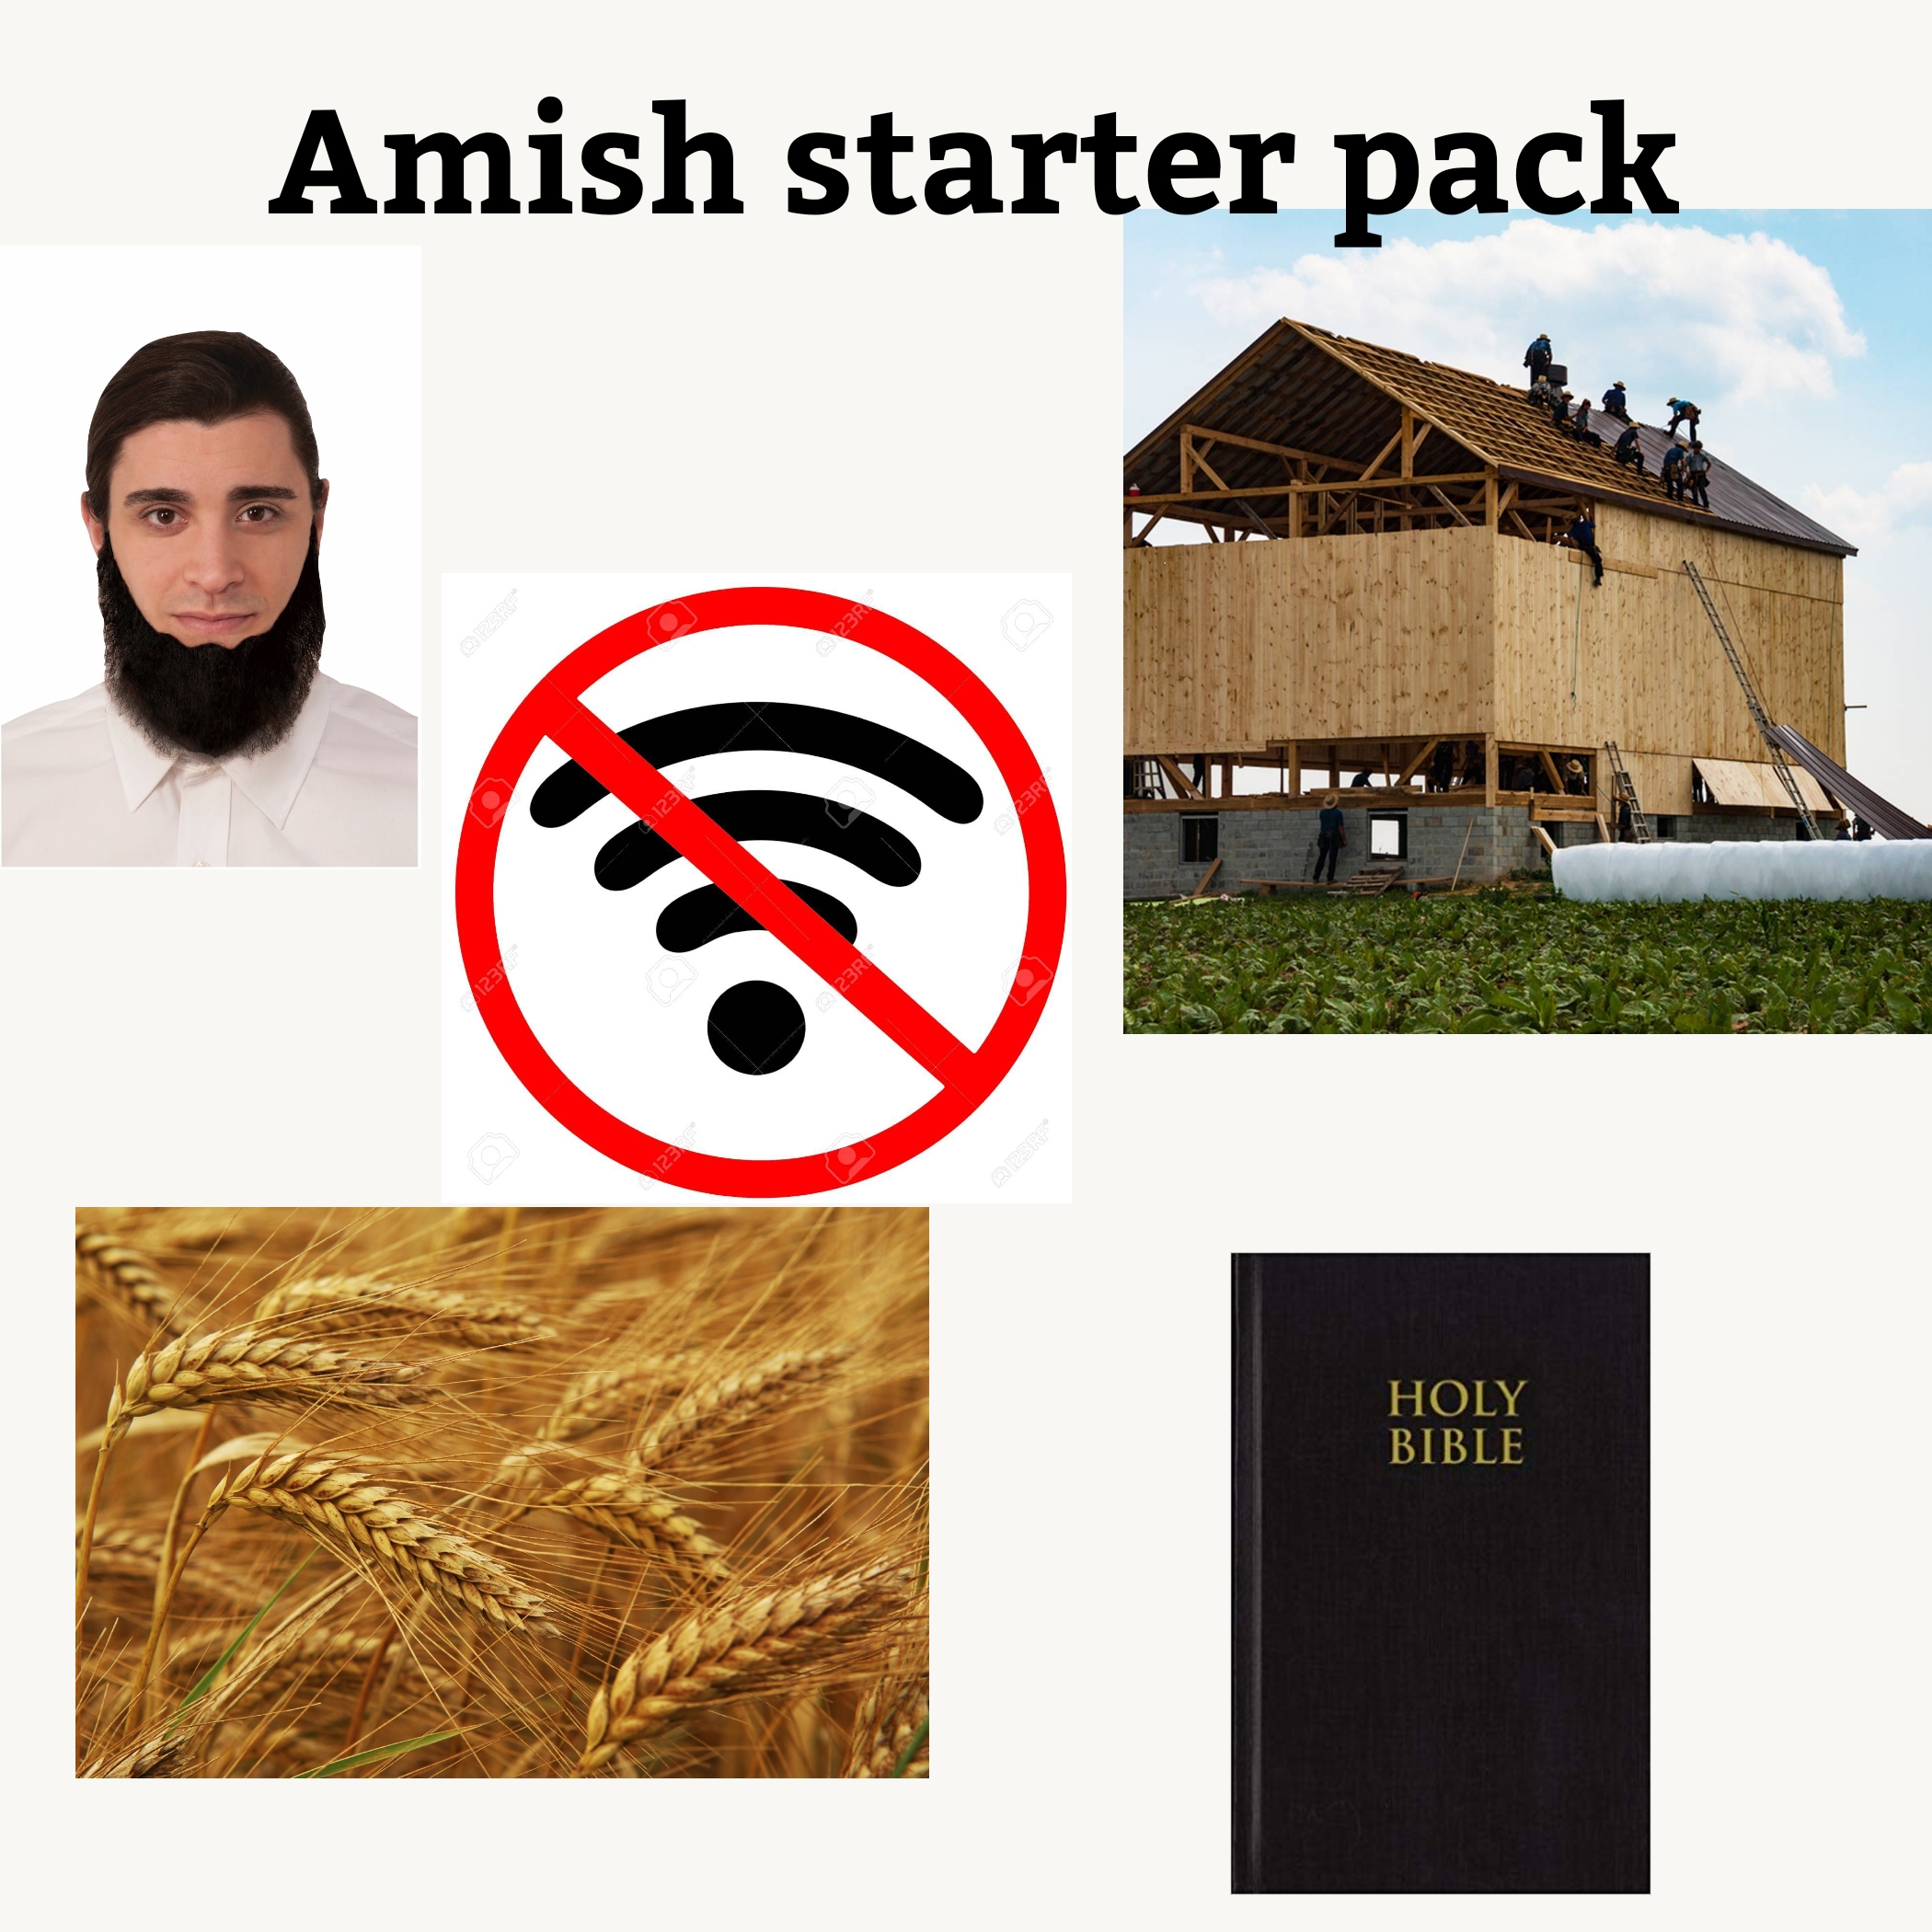 amish starter pack - Amish starter pack Holy Bible